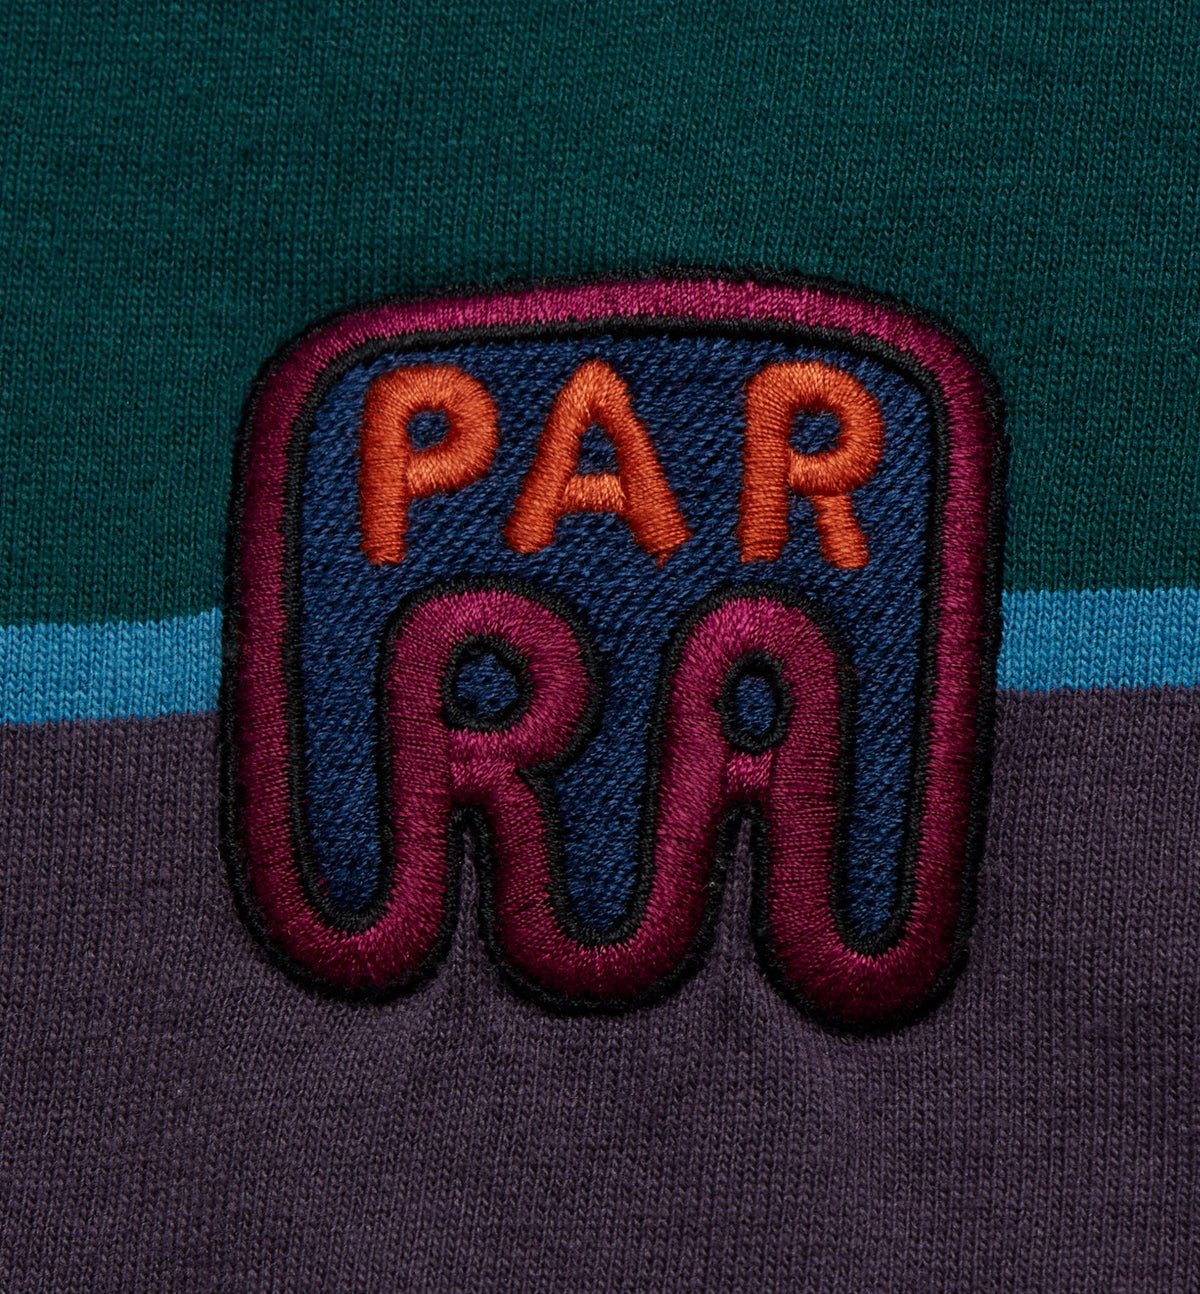 BY PARRA FAST FOOD LOGO STRIPED